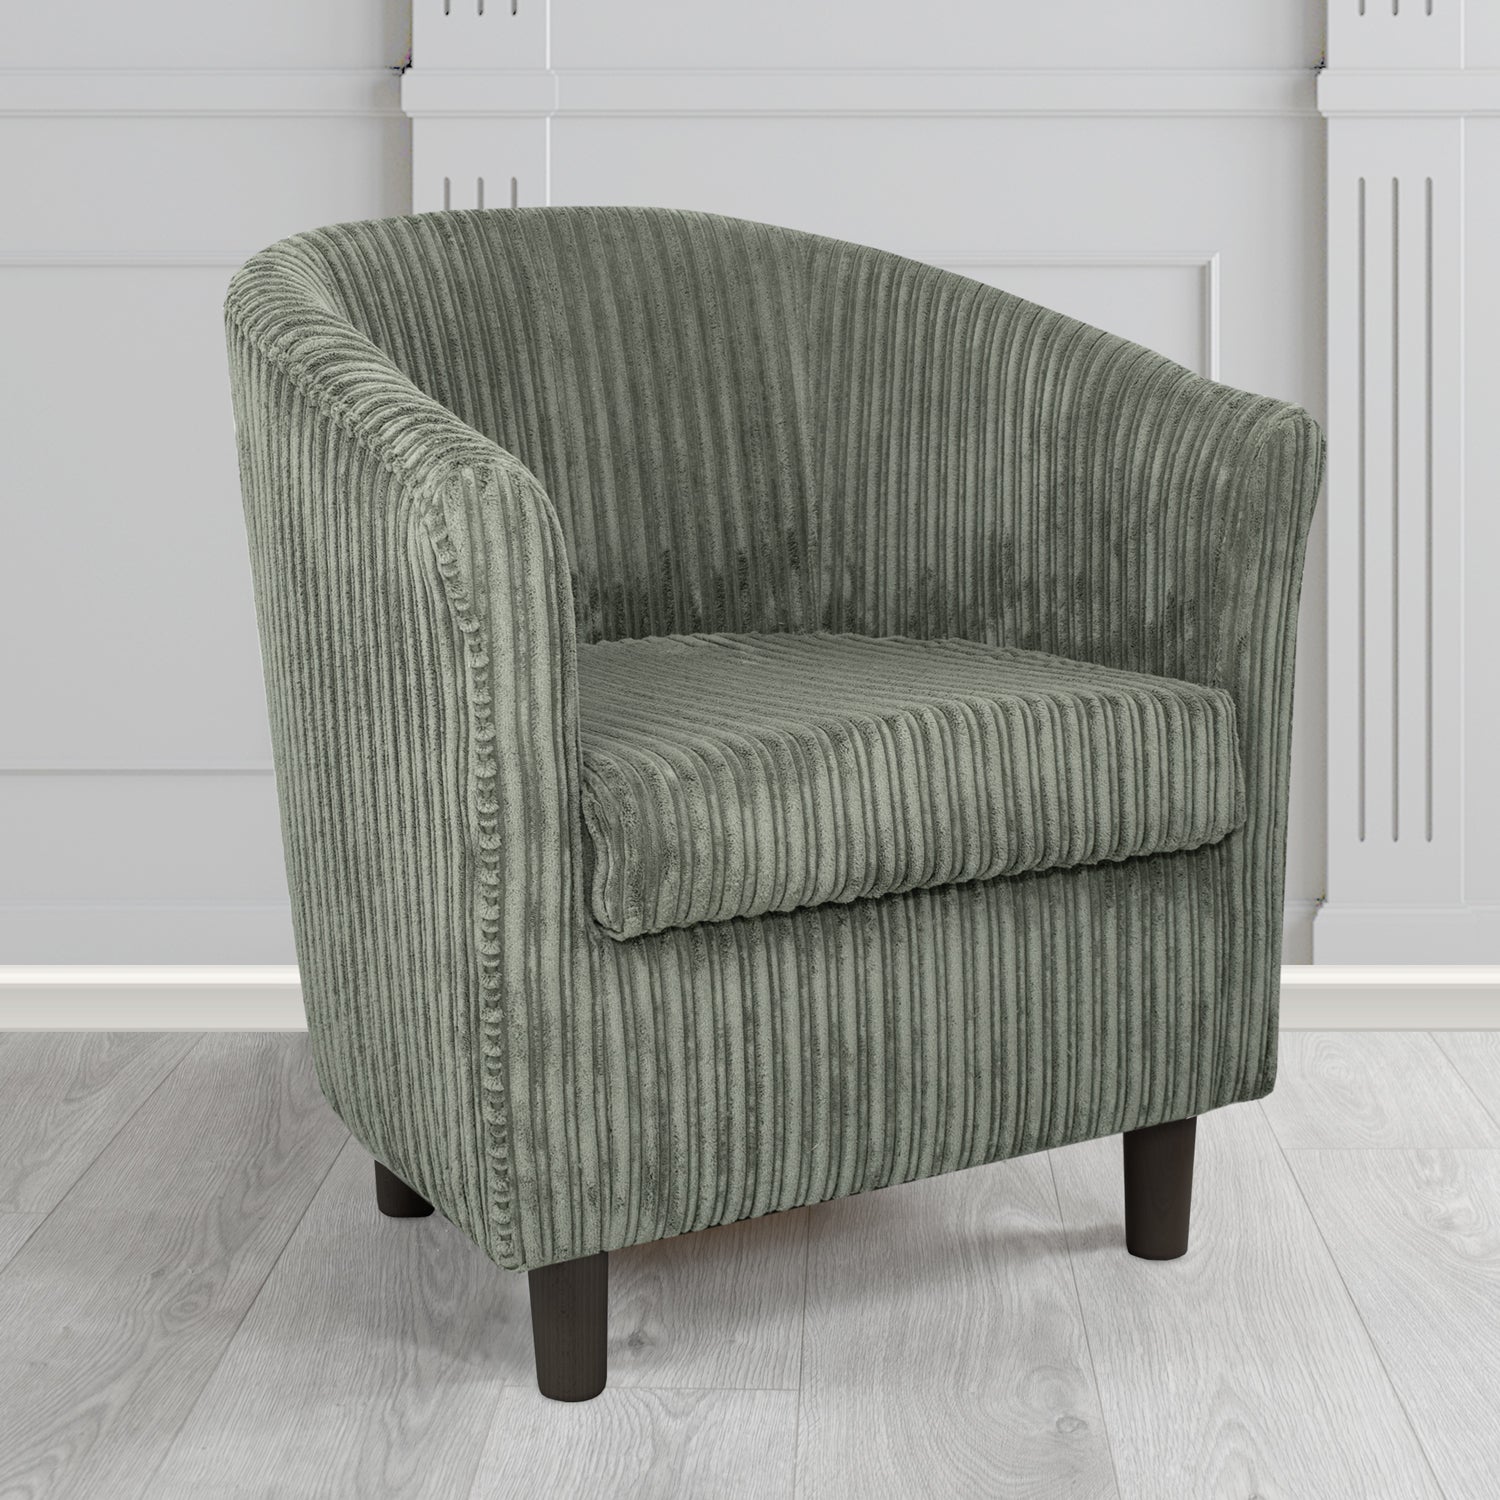 Tuscany in Conway Charcoal Plain Textured Fabric Tub Chair (6581720285226)